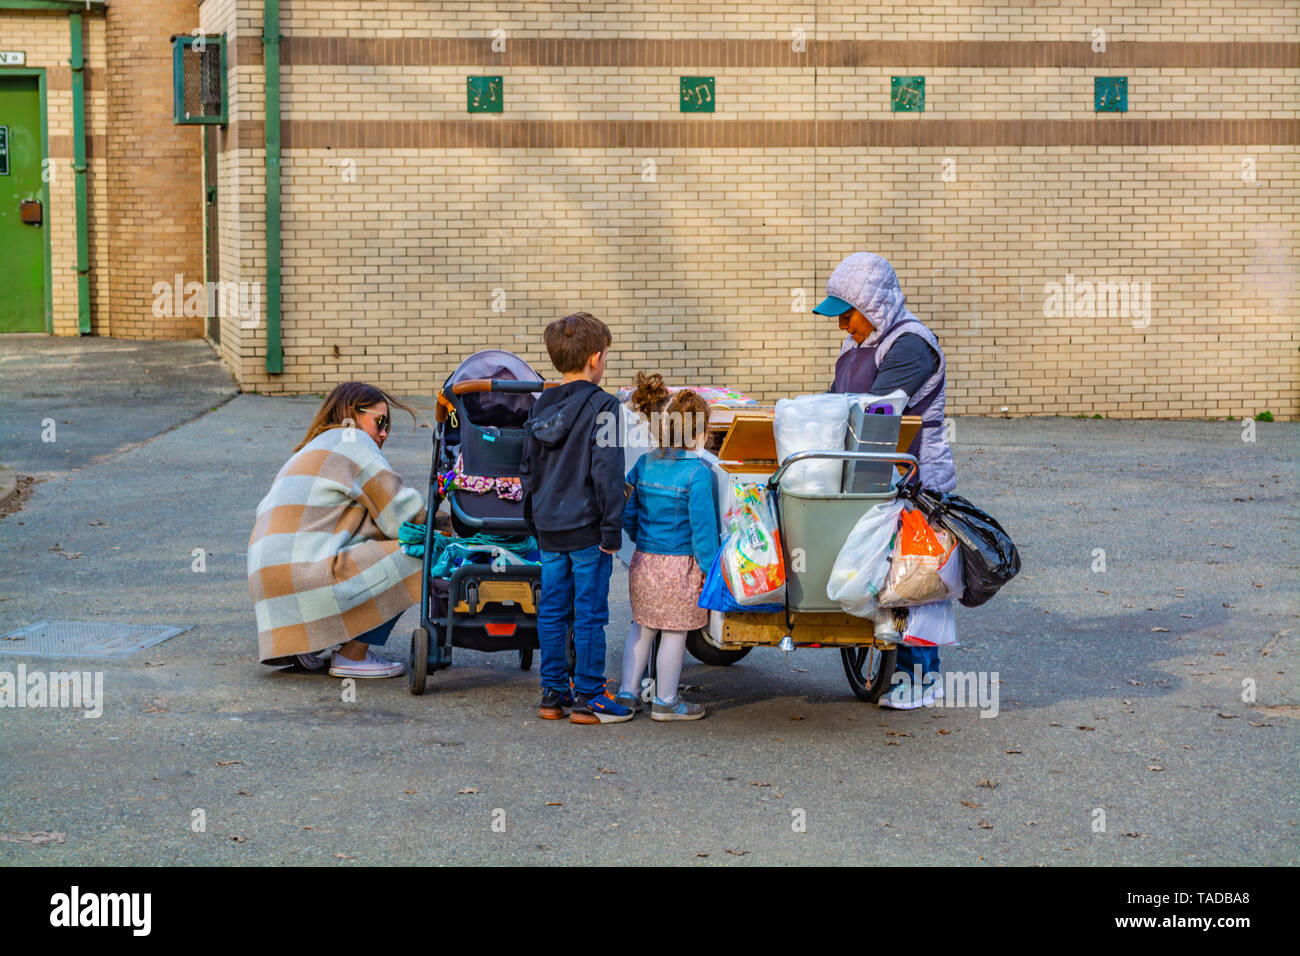 Kids are waiting for the ice cream by the ice cream cart. Stock Photo